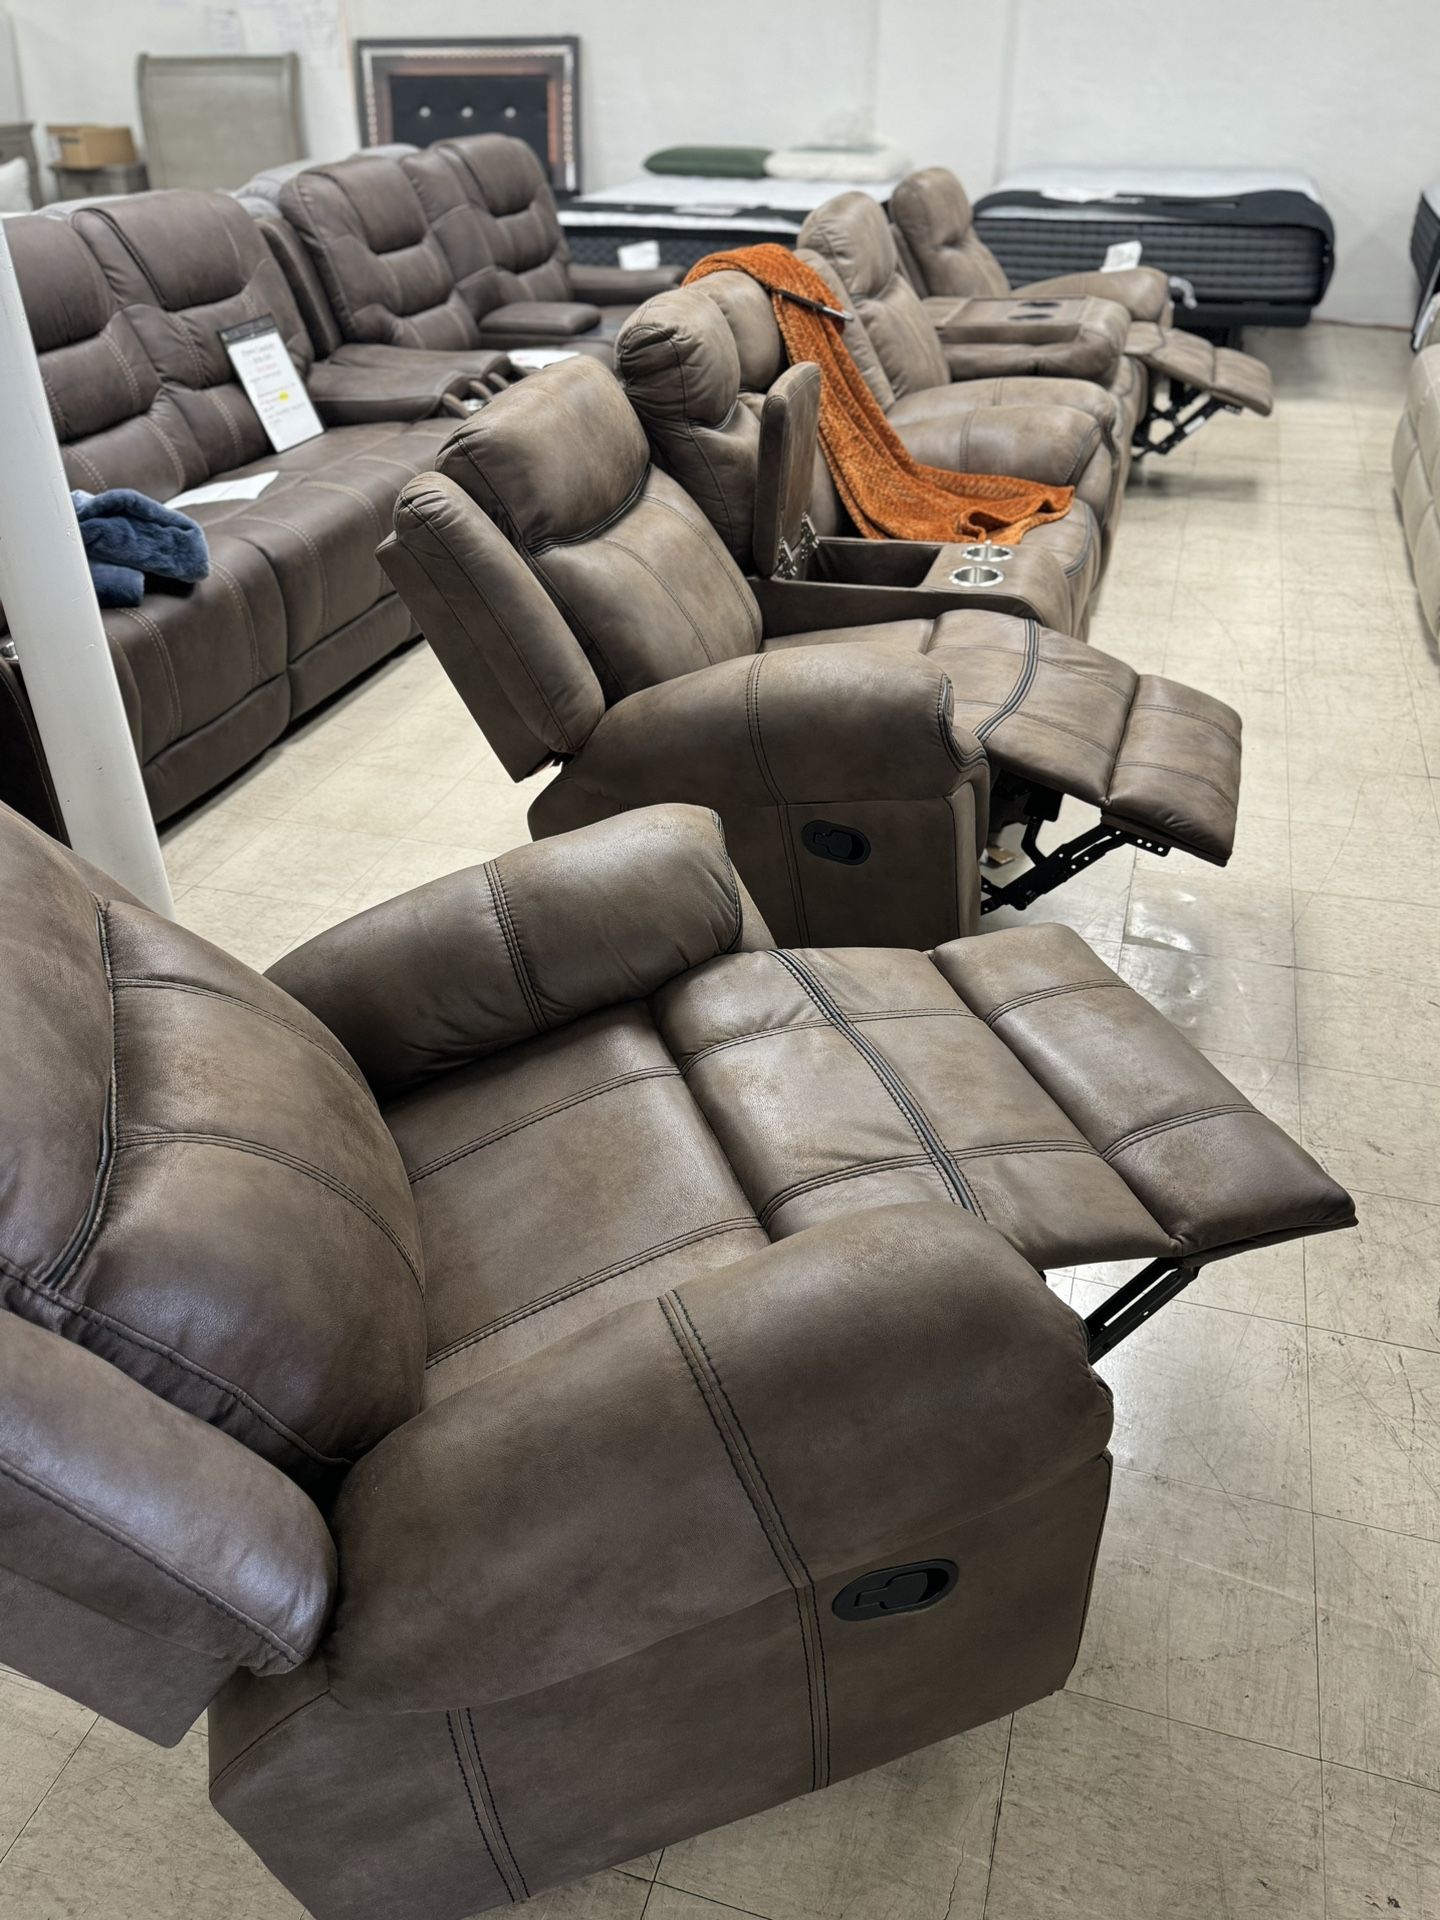 🔥Sofa Sectional 🔥 Couch, Furniture, Recliners